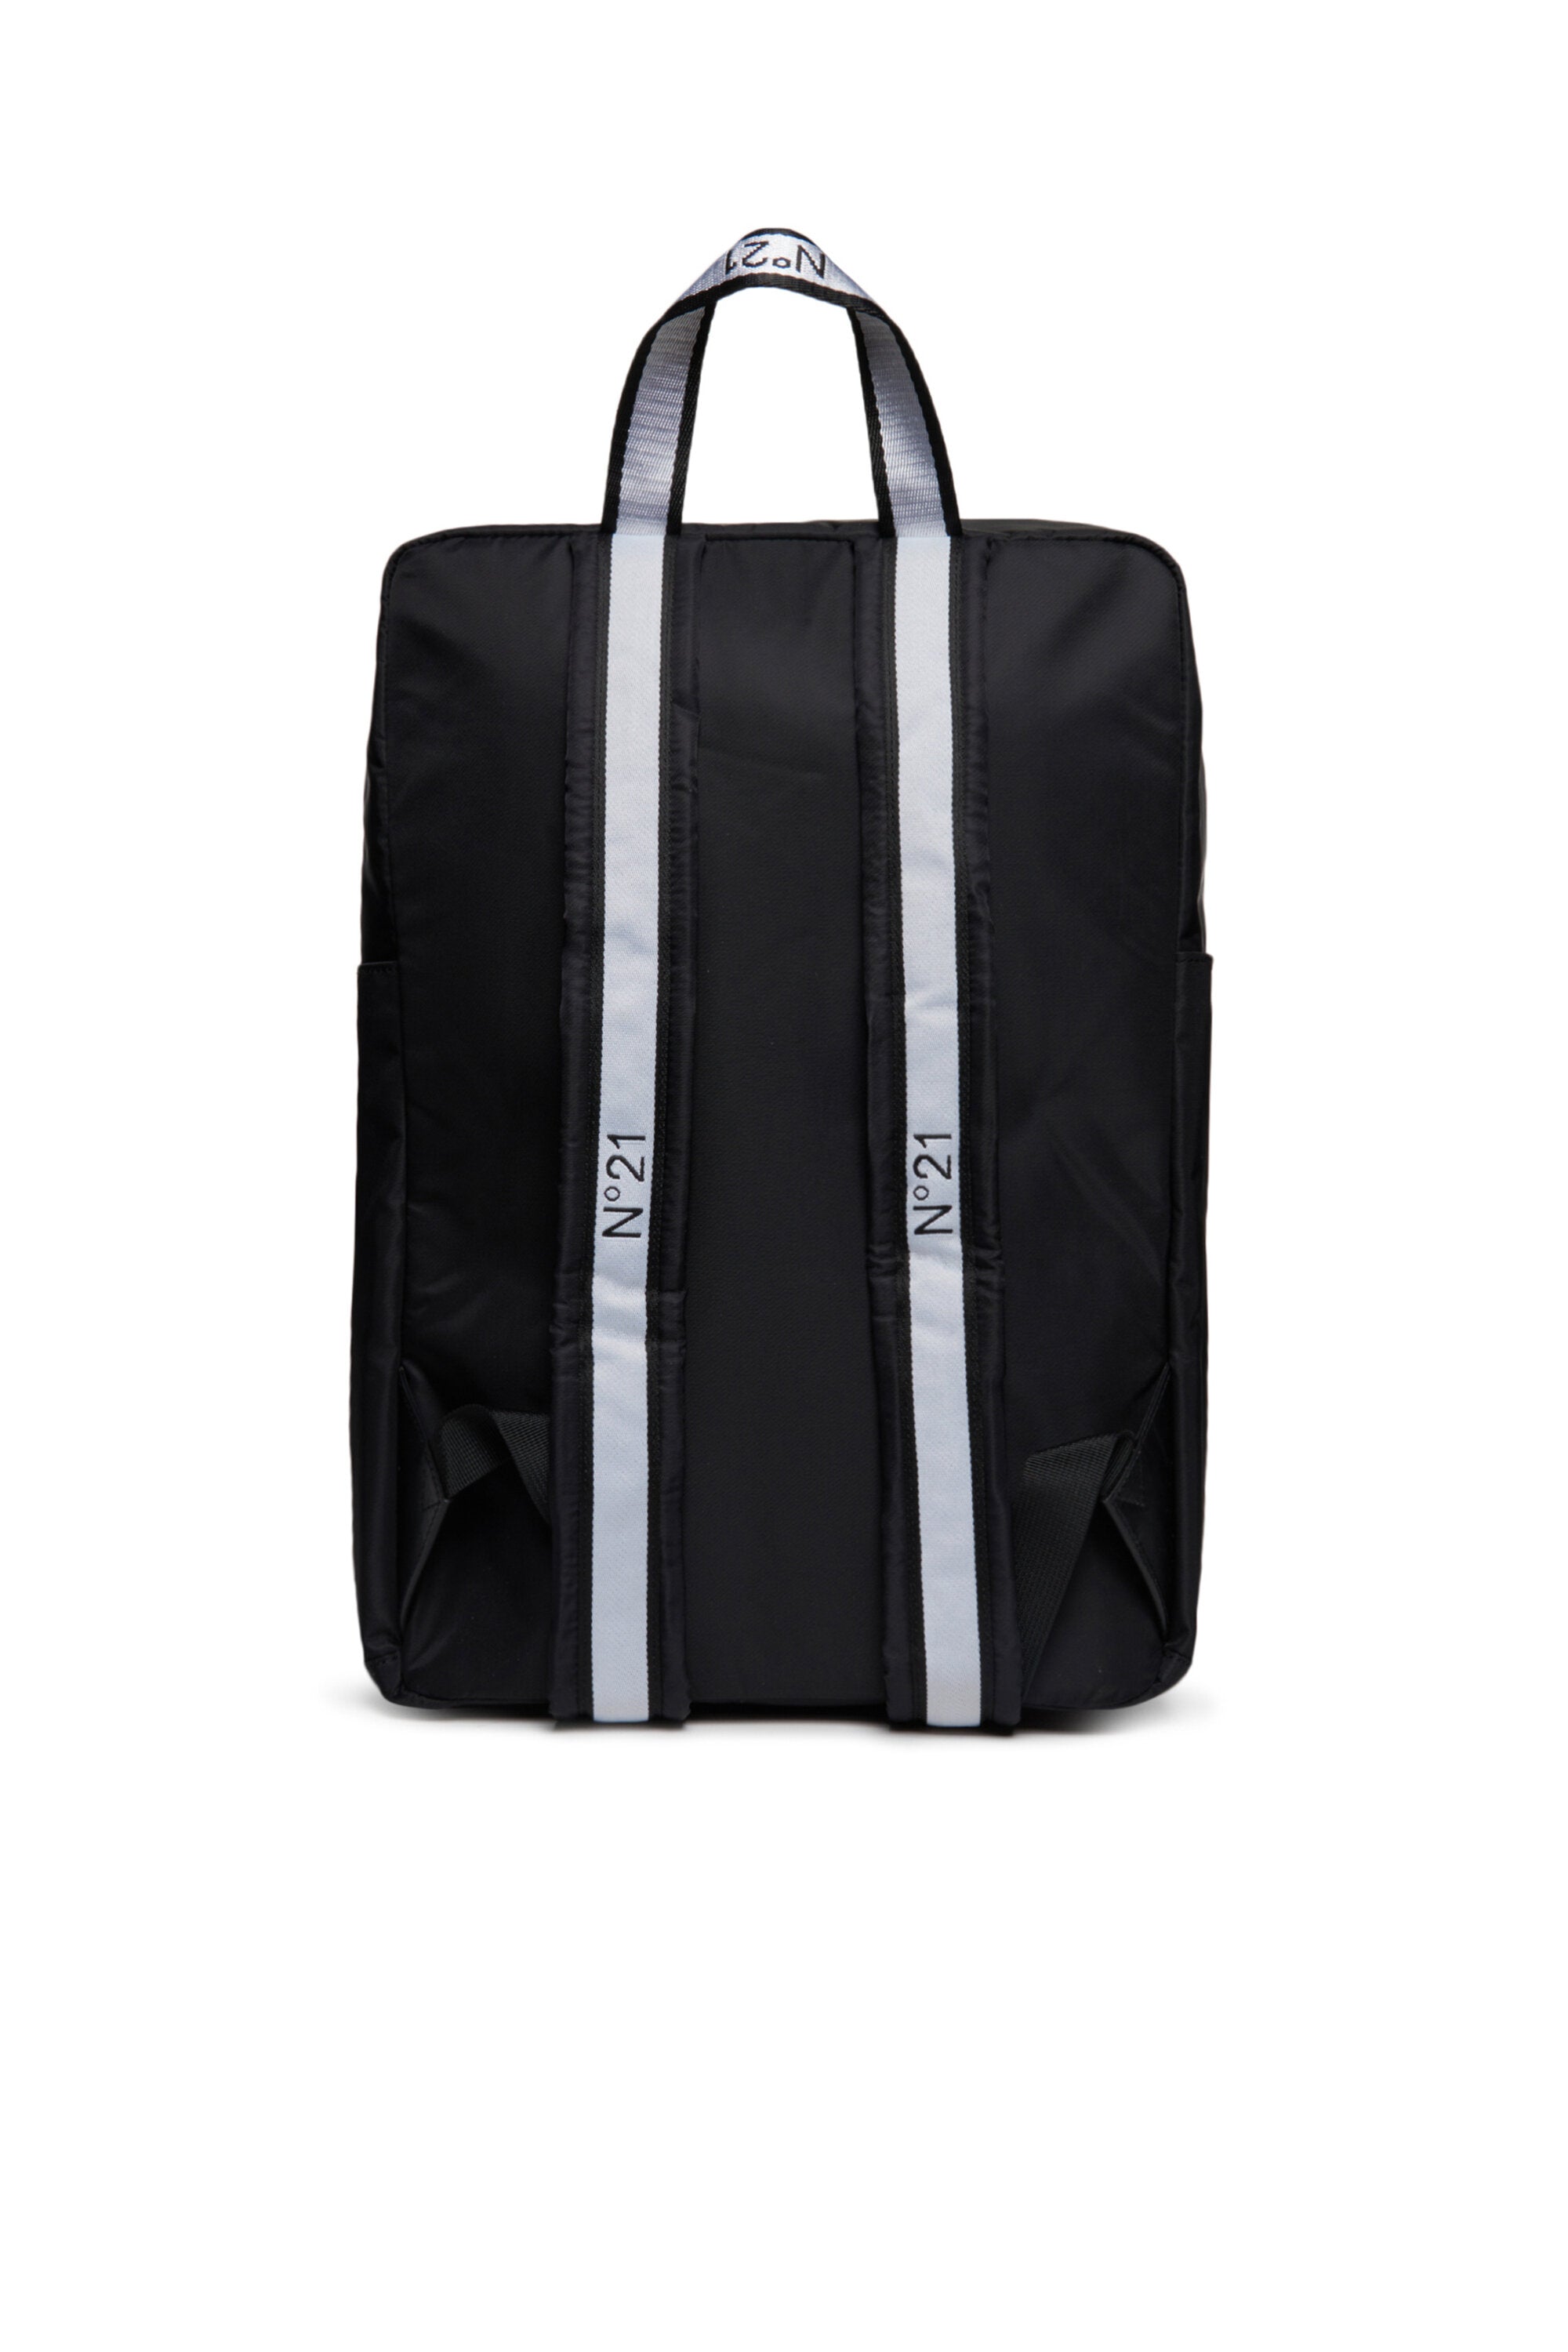 Black backpack with zip fastening and logo